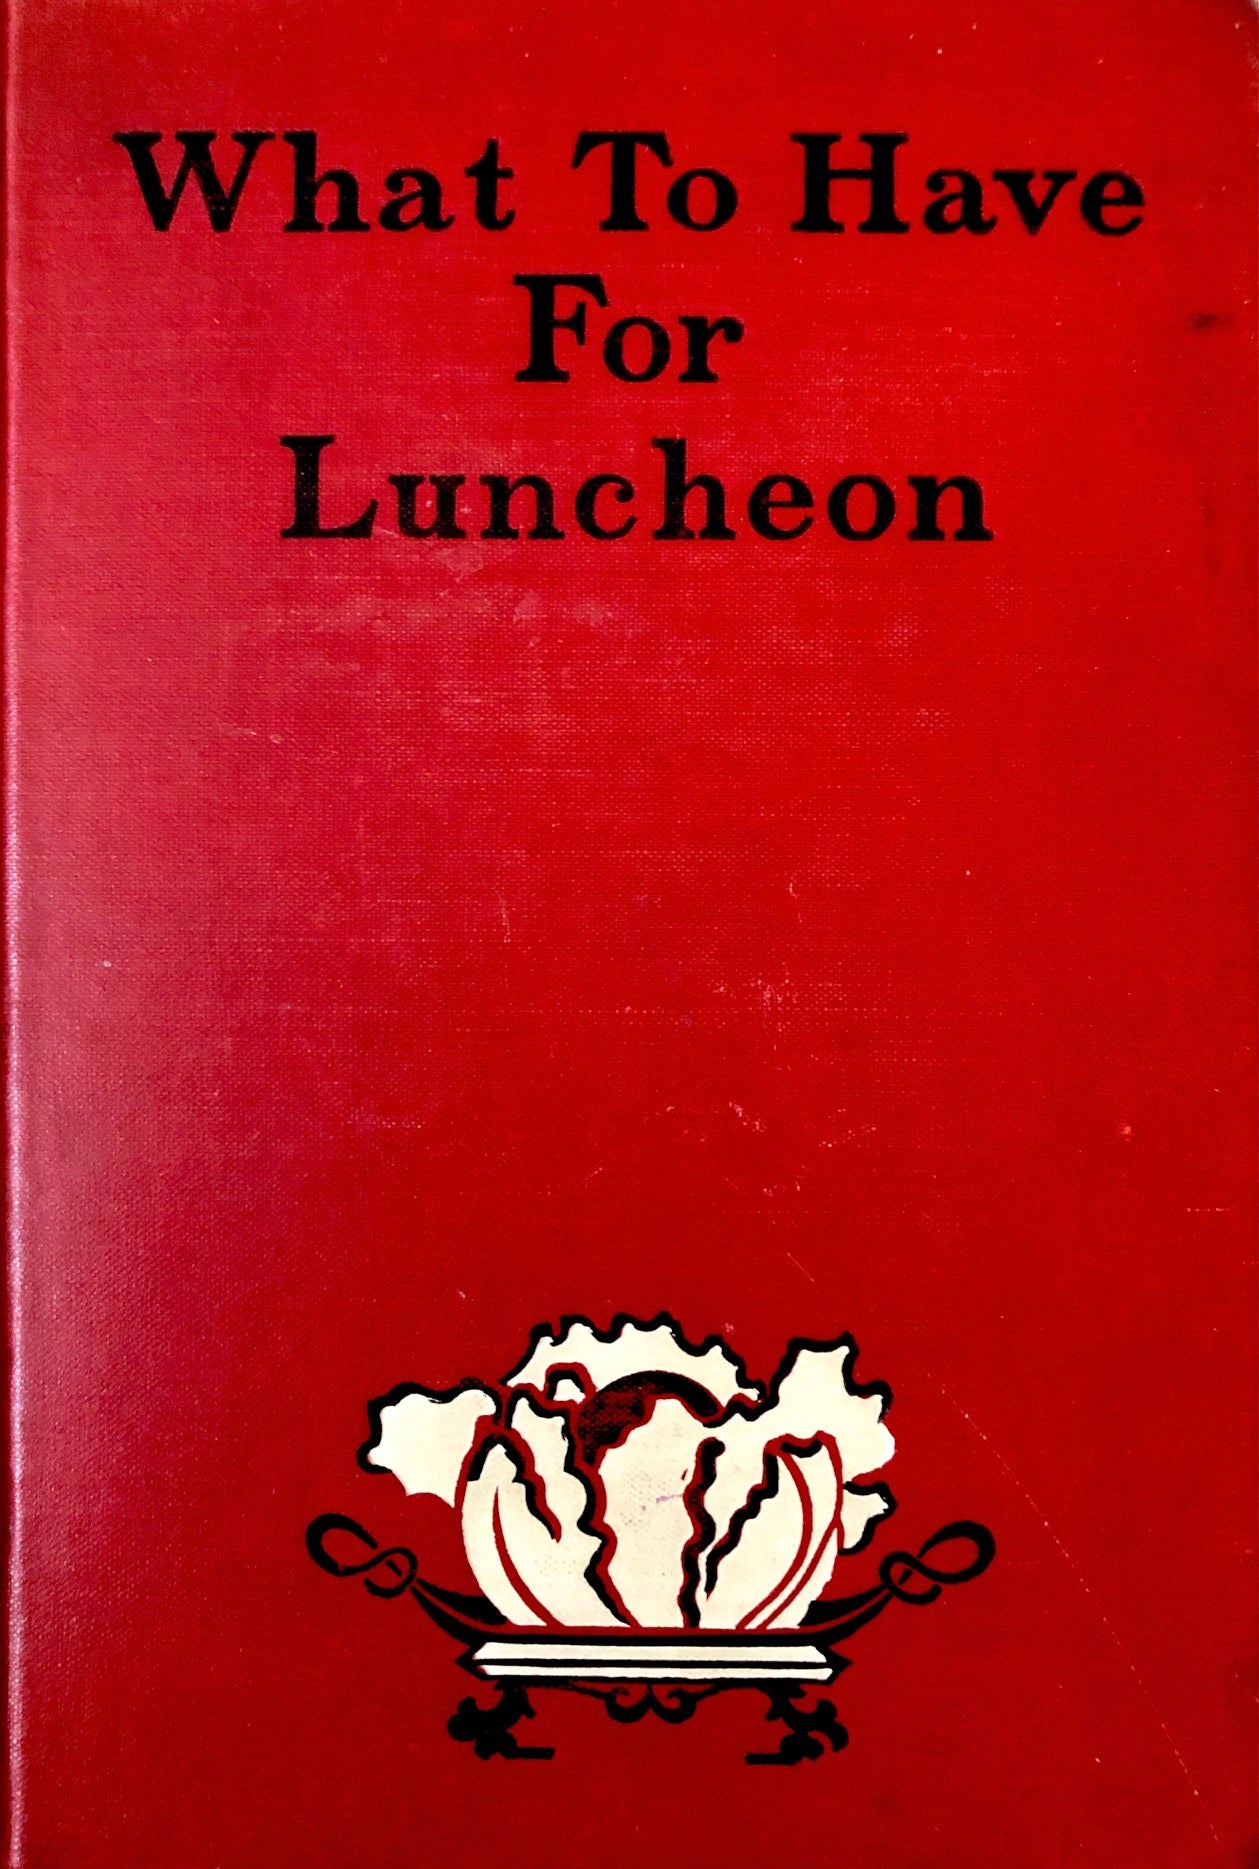 (American) Lincoln, Mrs. Mary J. What to Have for Luncheon.